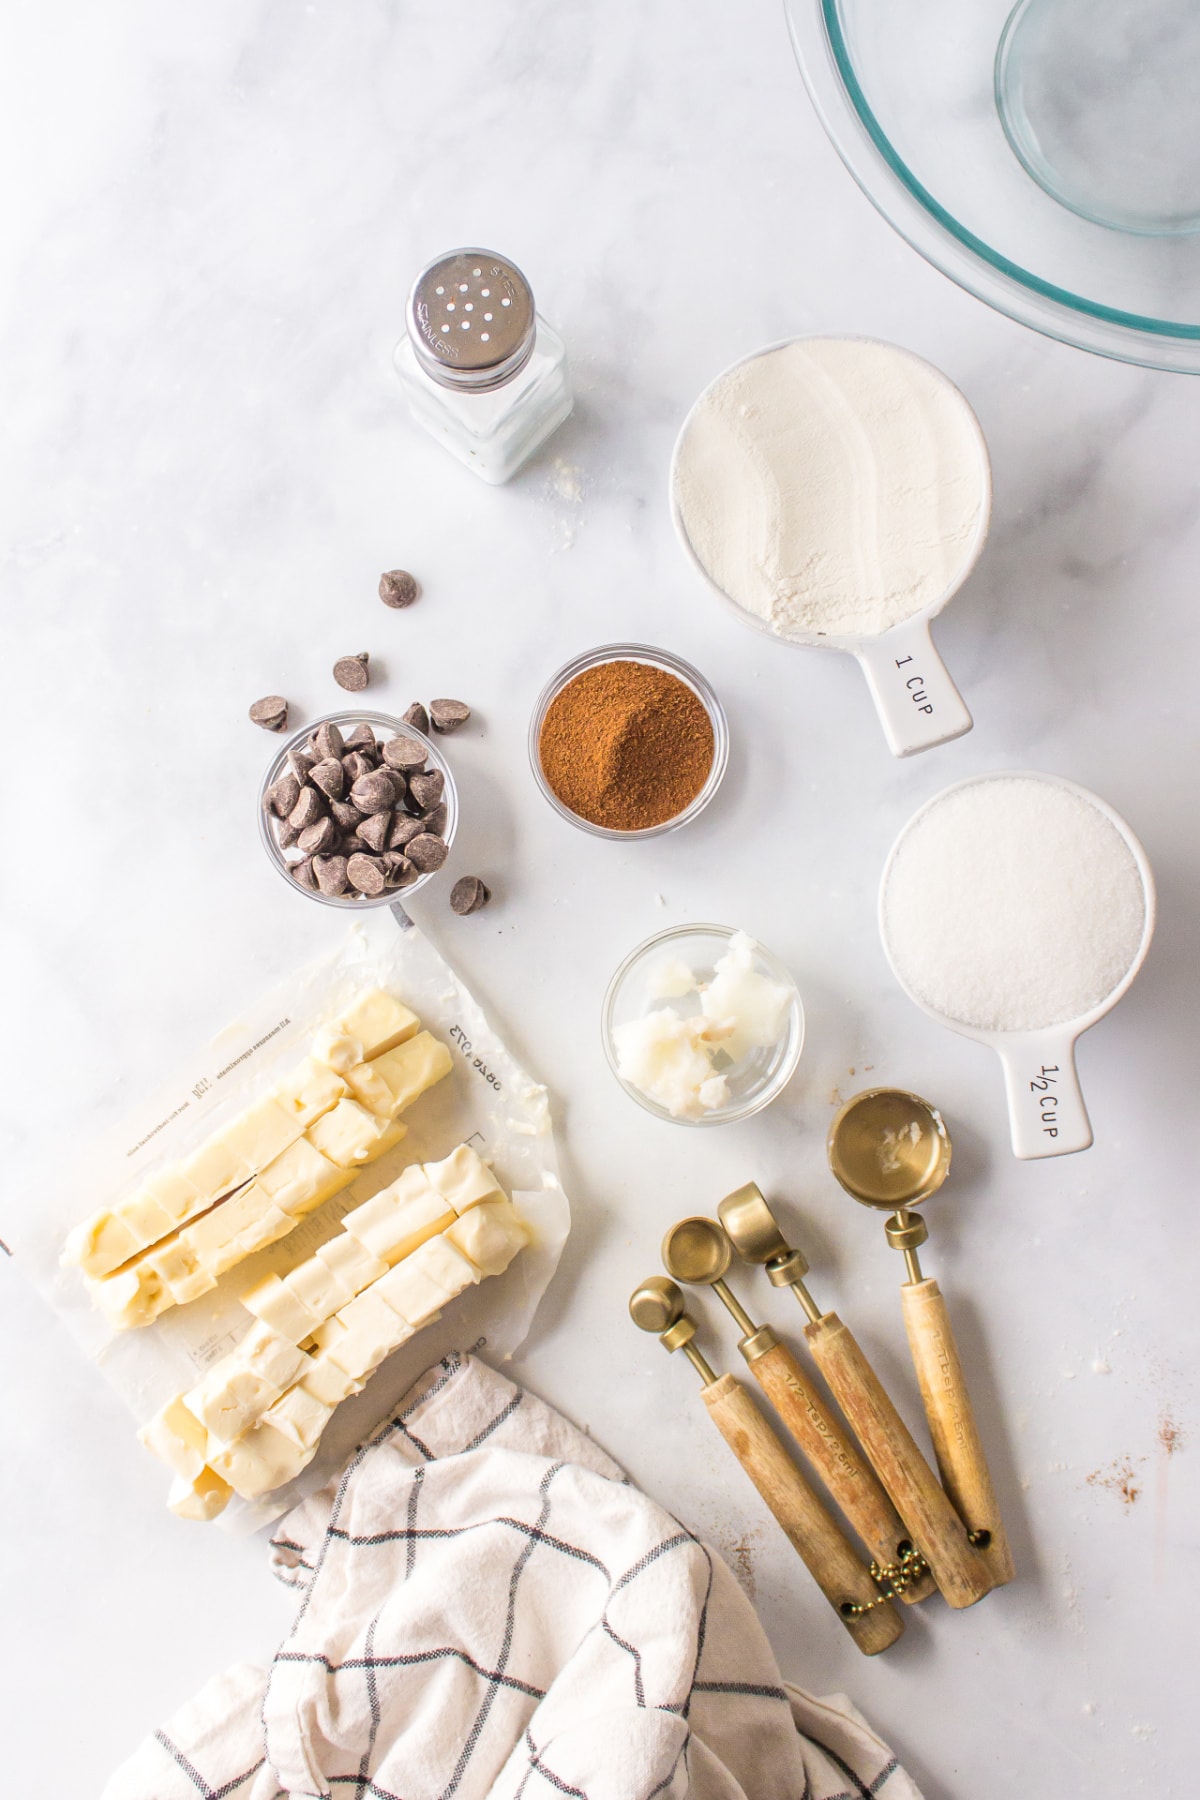 ingredients displayed for making chocolate dipped espresso shortbread cookies